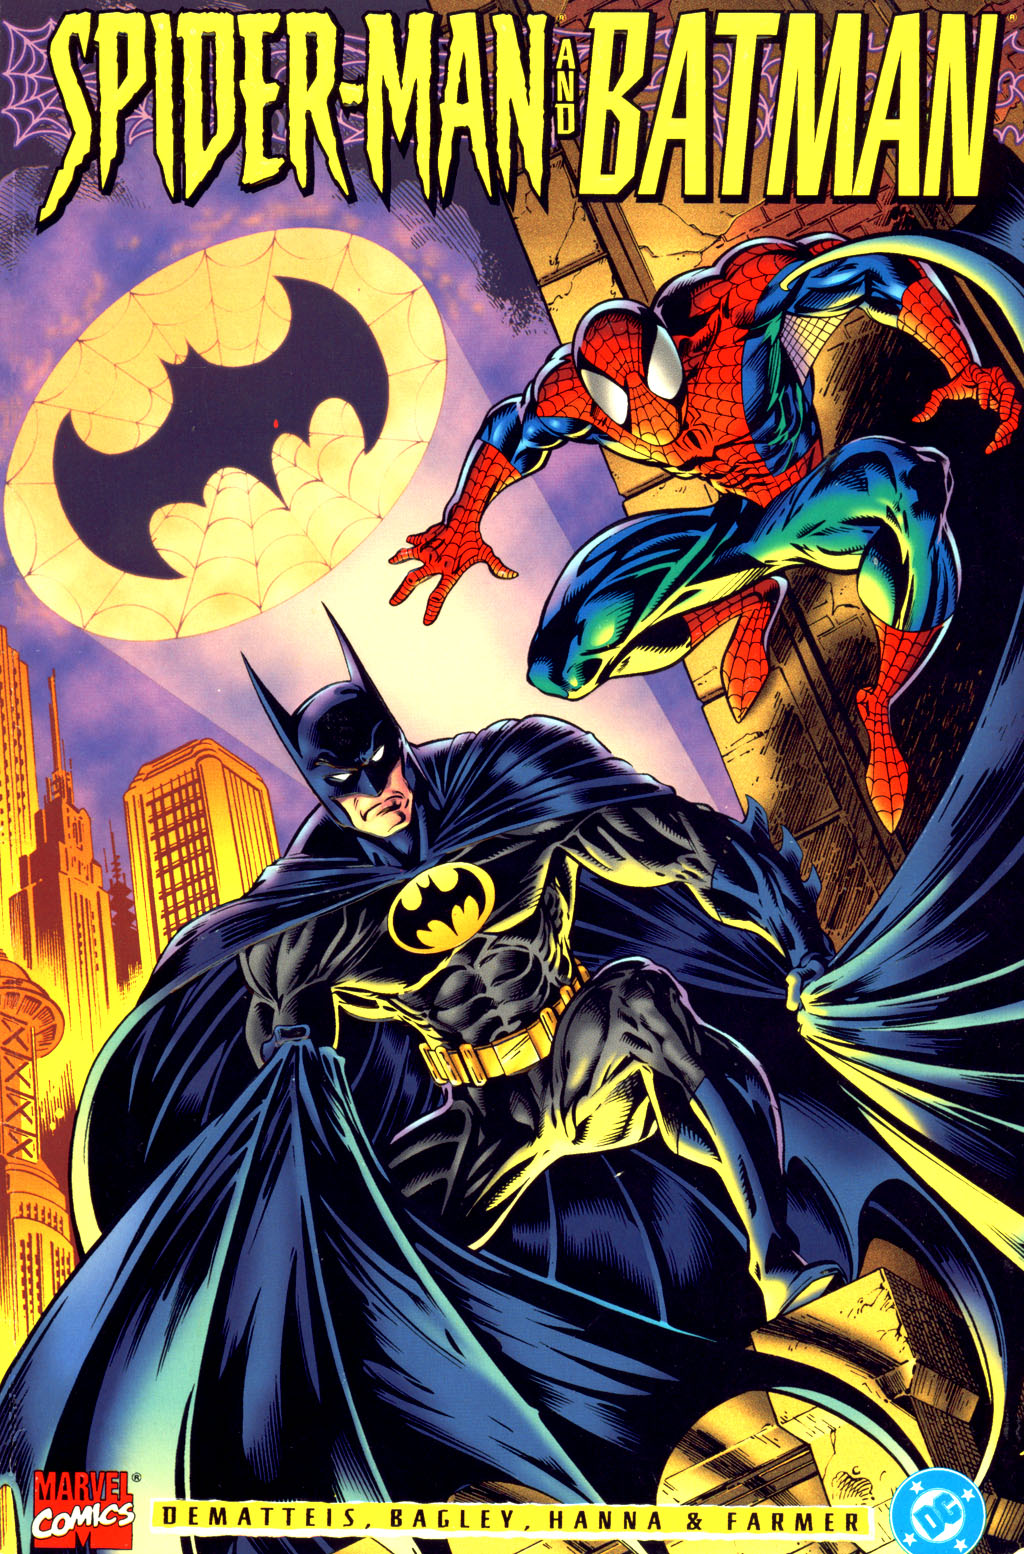 Read online Spider-Man and Batman comic -  Issue # Full - 1